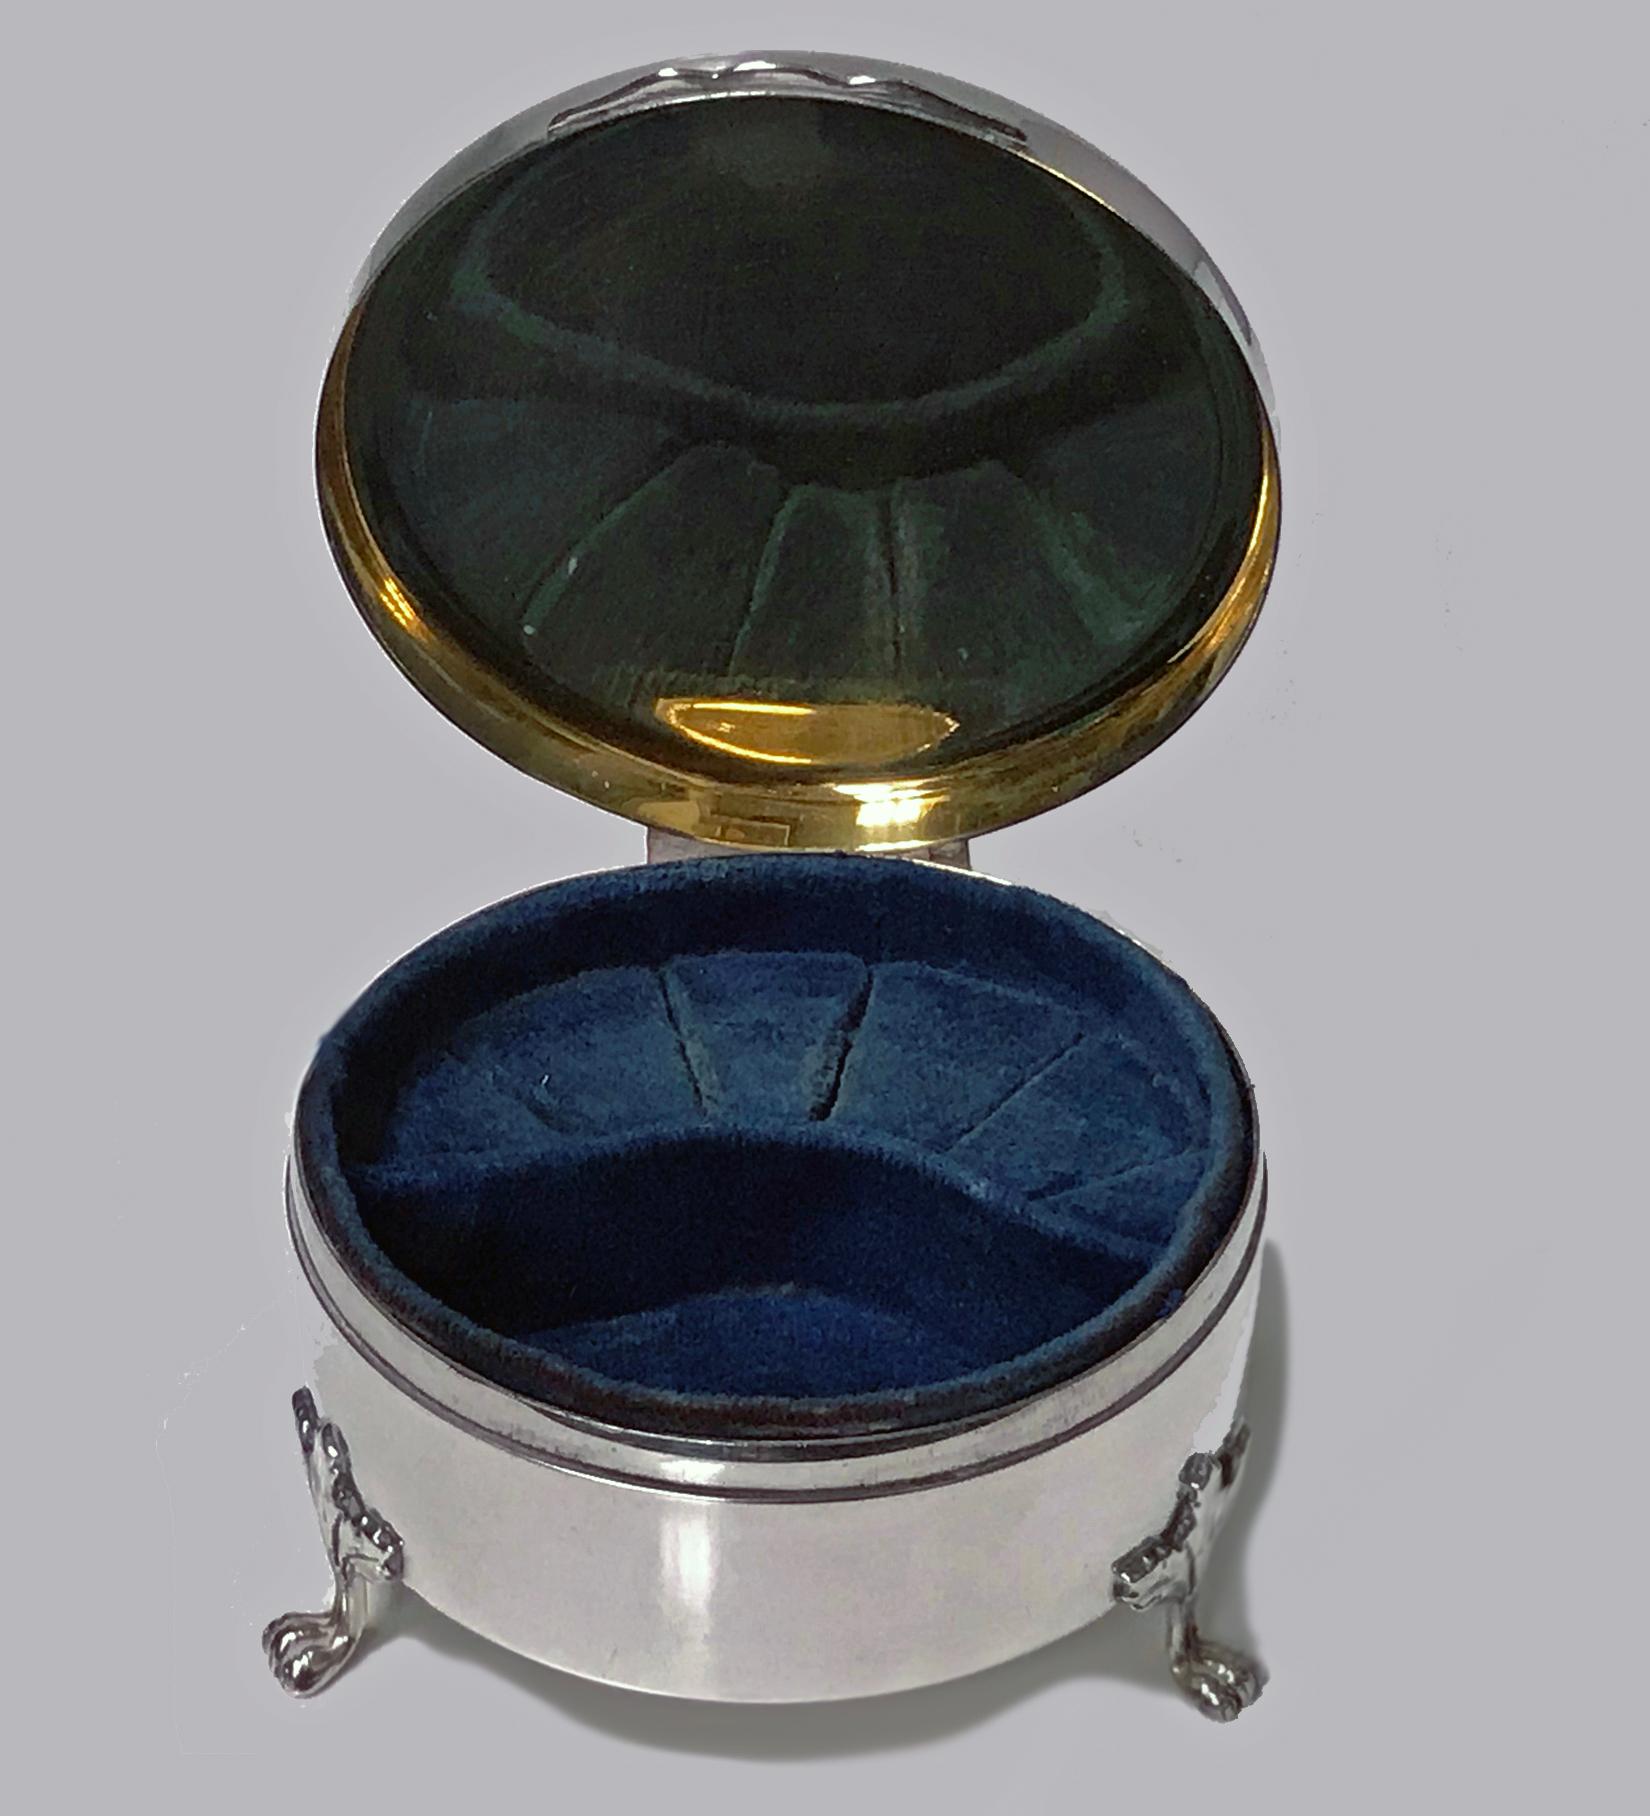 Vintage Birks Sterling Silver Jewellery Box, 1949. The box of circular form on three acanthus supports, plain body, the hinged cover with foliate scroll engraving centering a monogrammed panel, interior cover original gilding. The box interior with